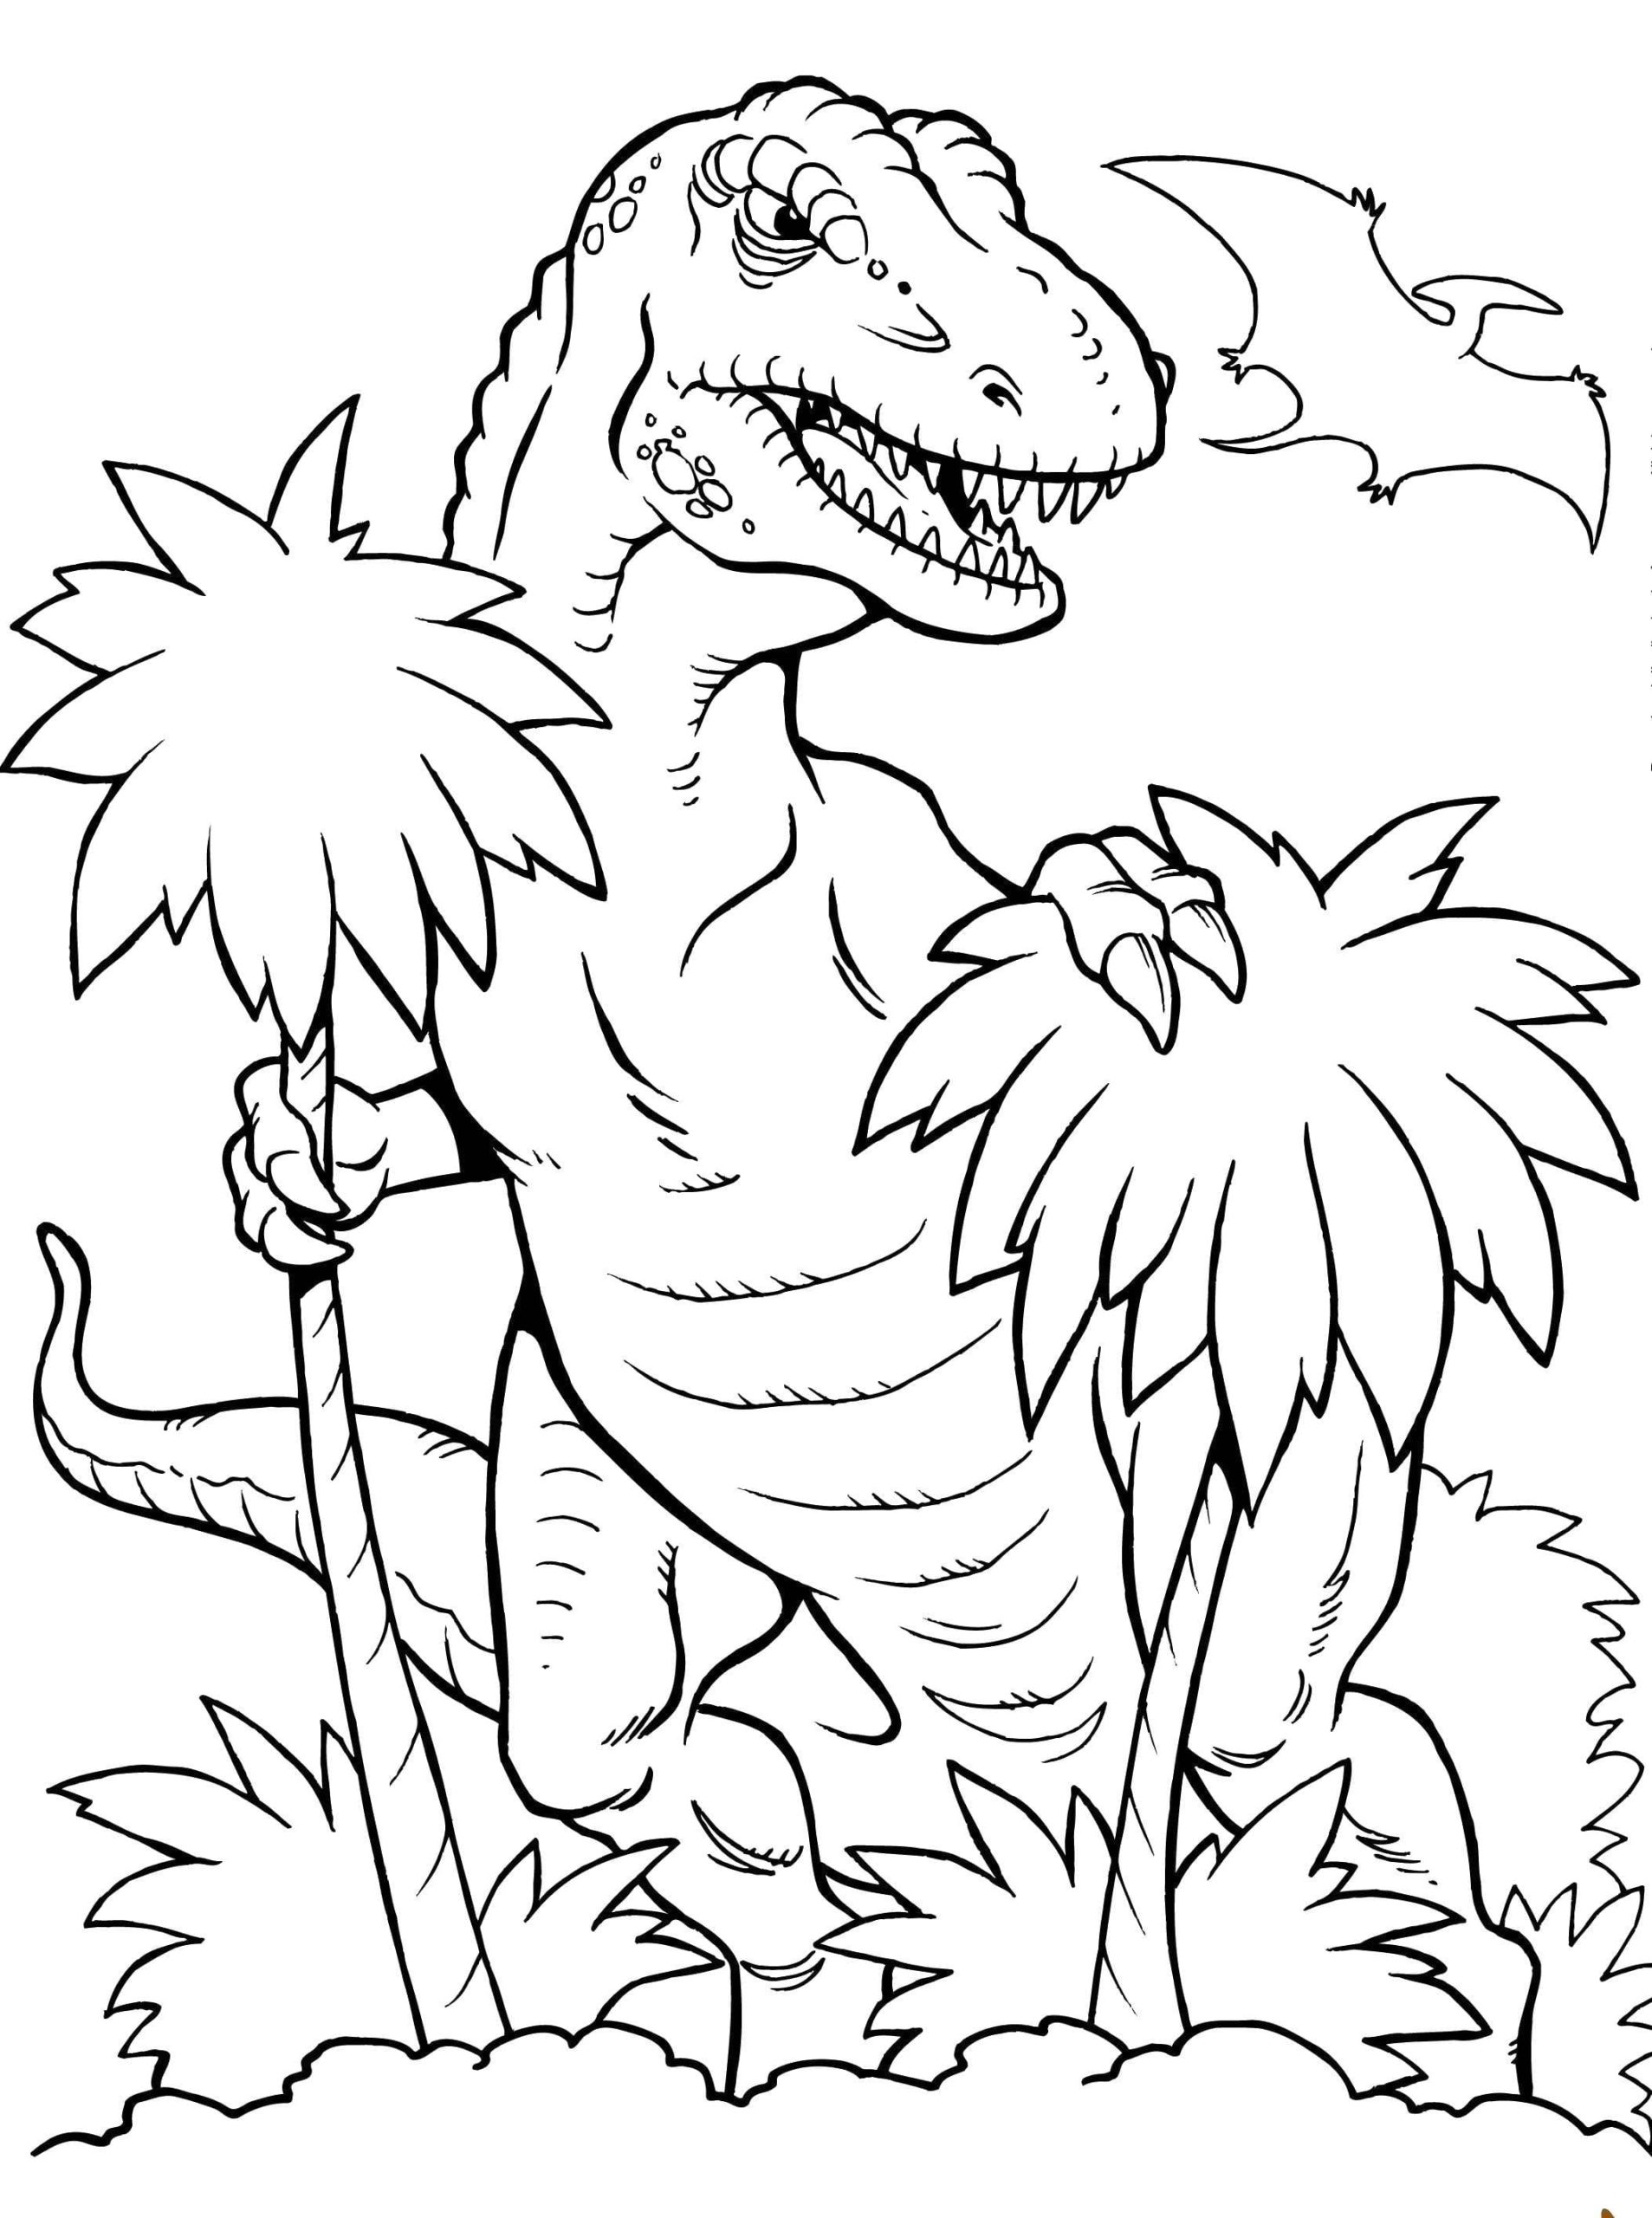 Coloring page T-rex Dinosaur among the trees